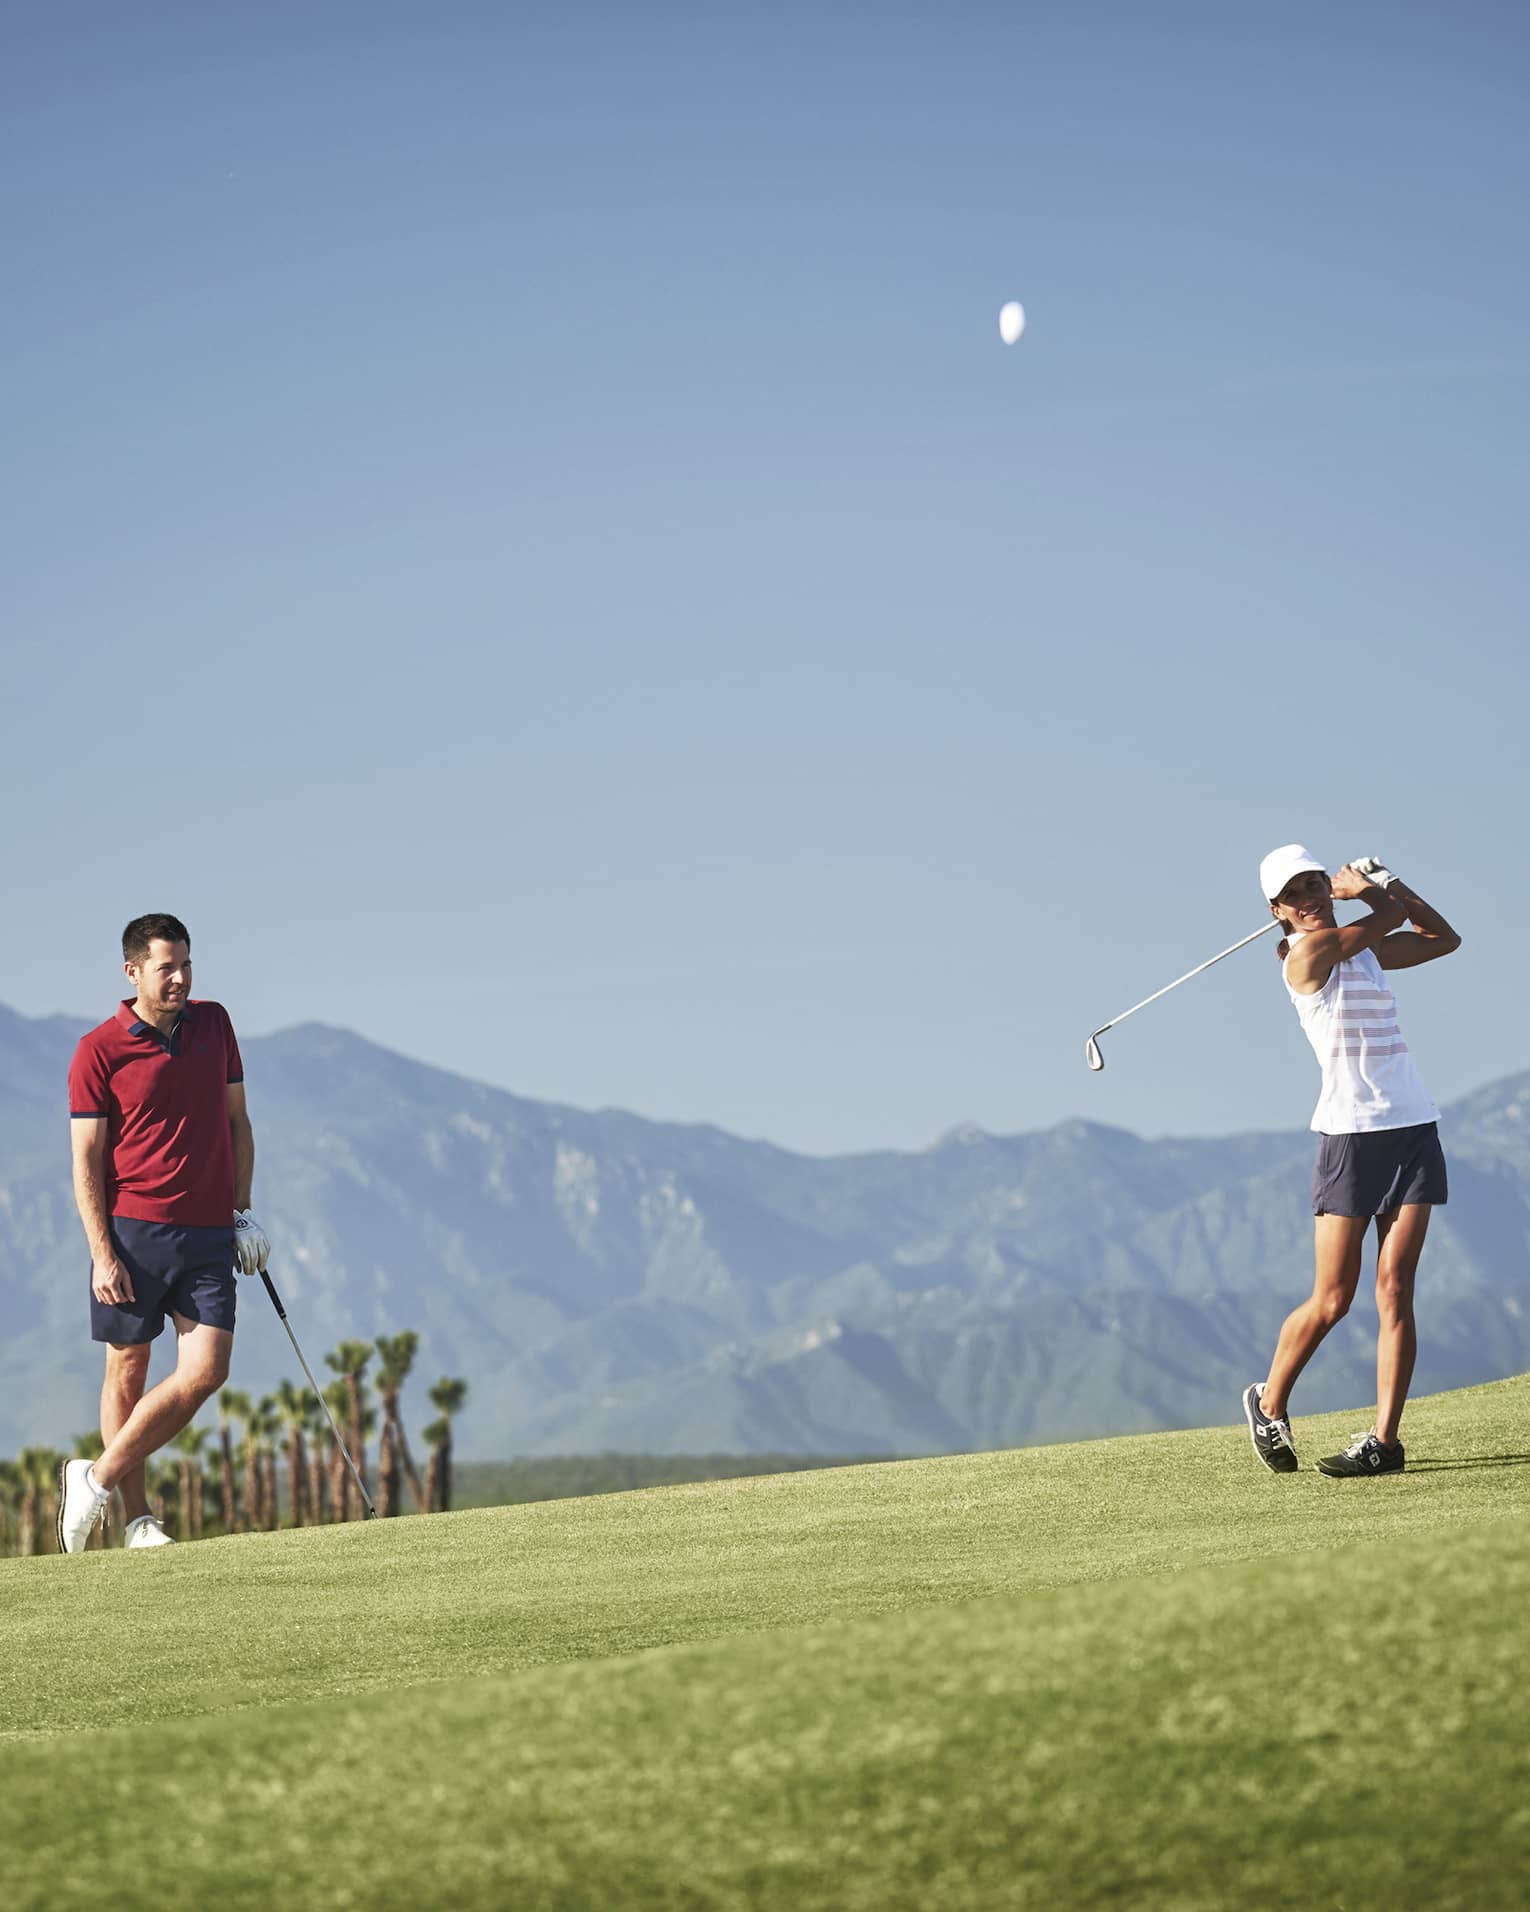 A golfer leans on their club observing another's swing on a picturesque golf course silhouetted by a mountain range.